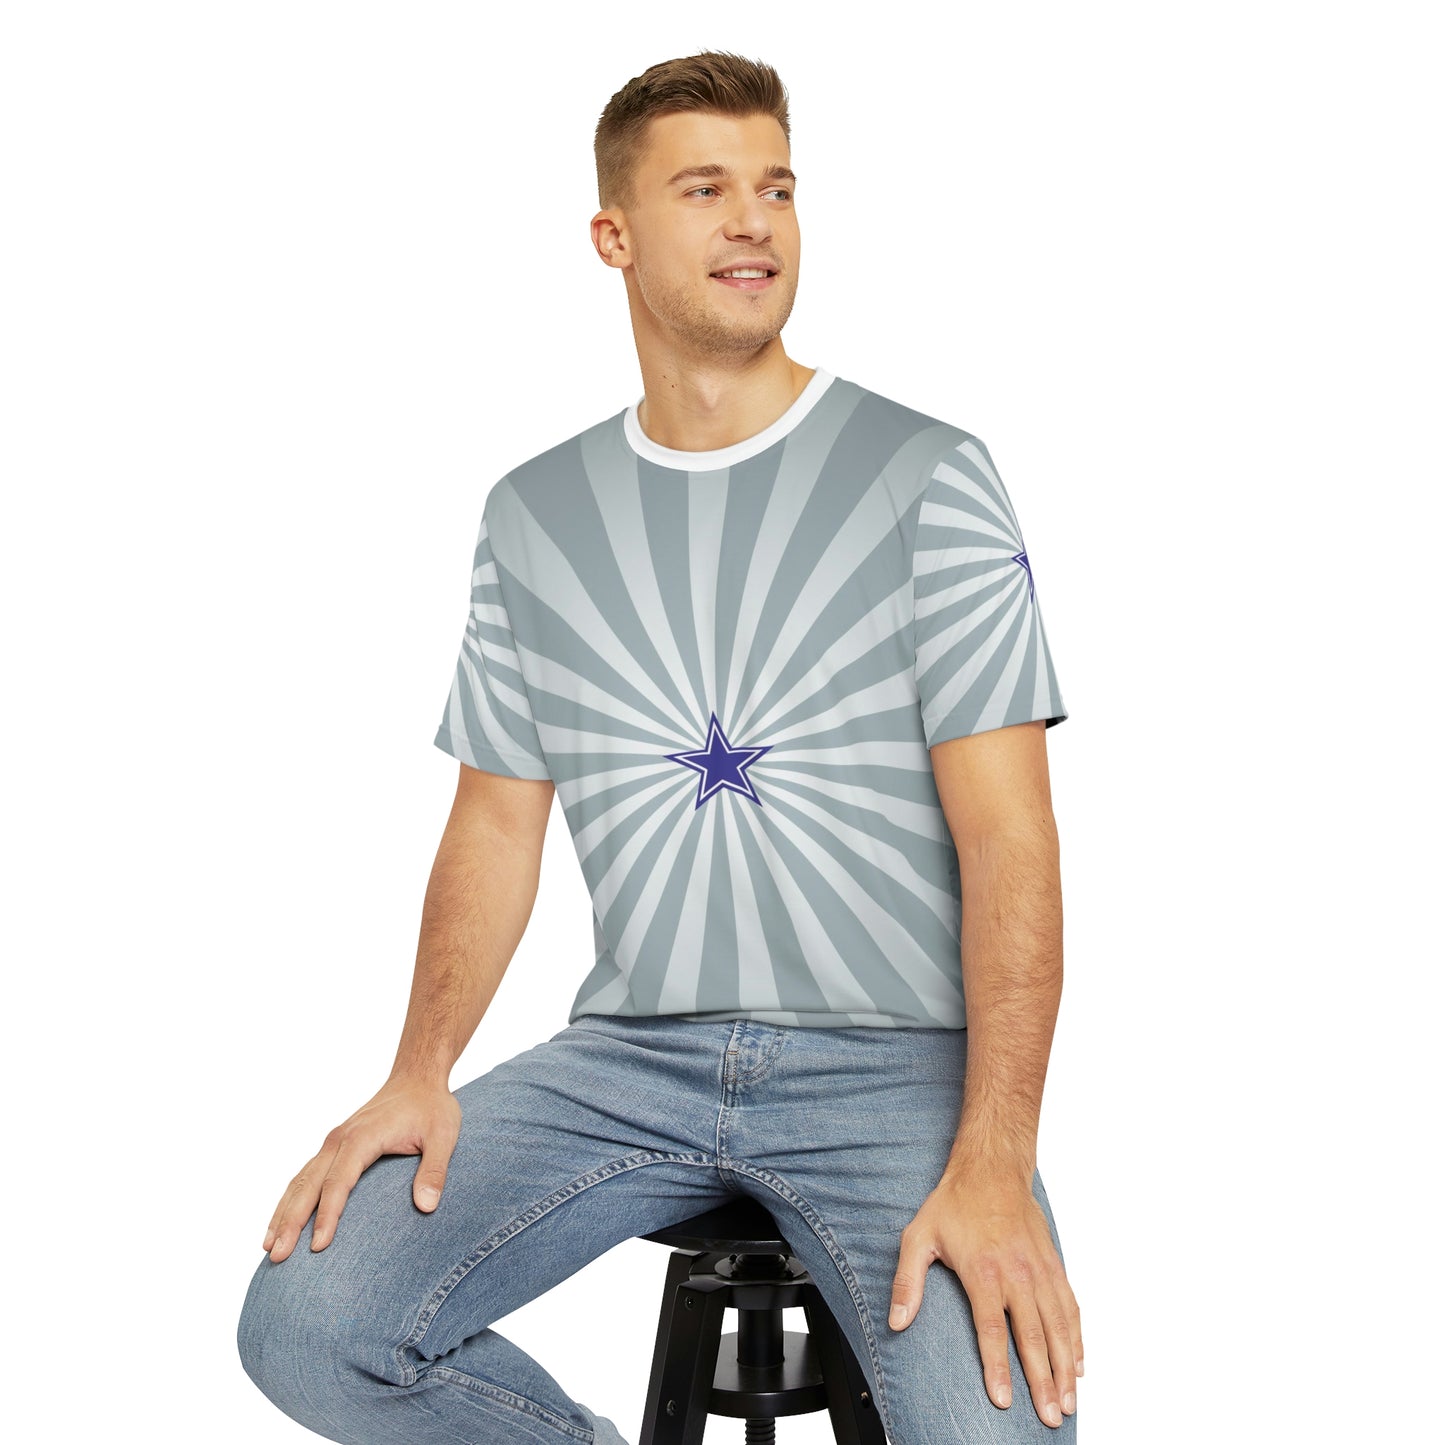 Geotrott NFL Dallas Cowboys Men's Polyester All Over Print Tee T-Shirt